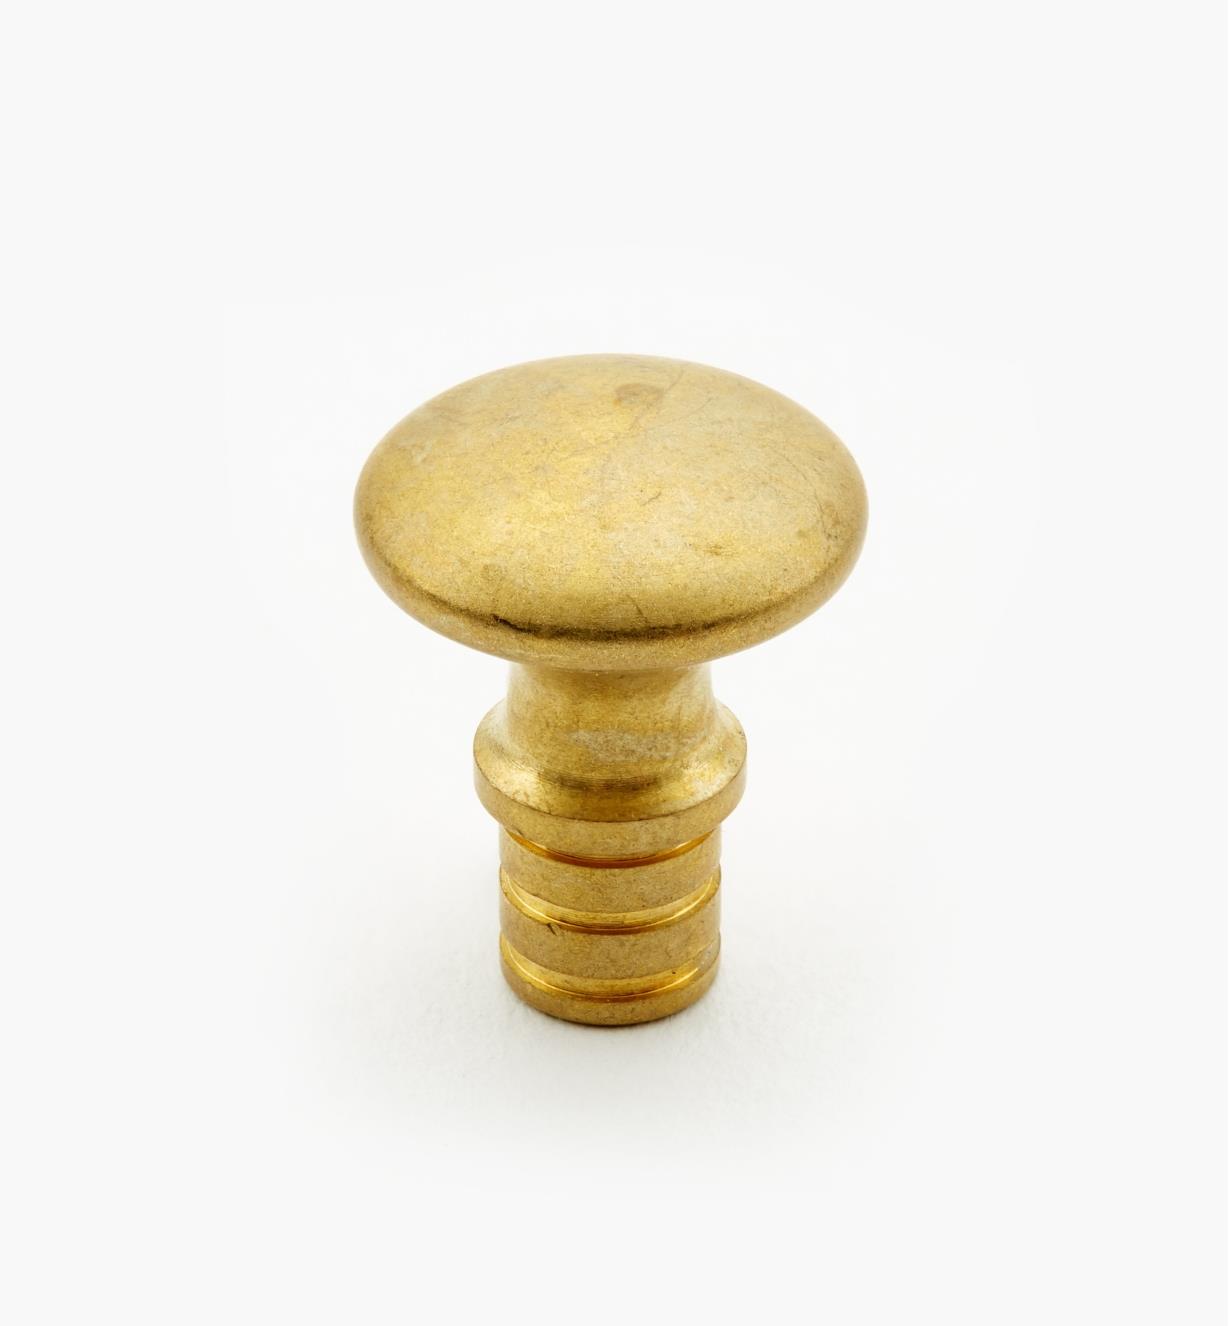 05H2205 - 9/16" x 7/16" Lee Valley Small Turned Brass Knob (11/16")